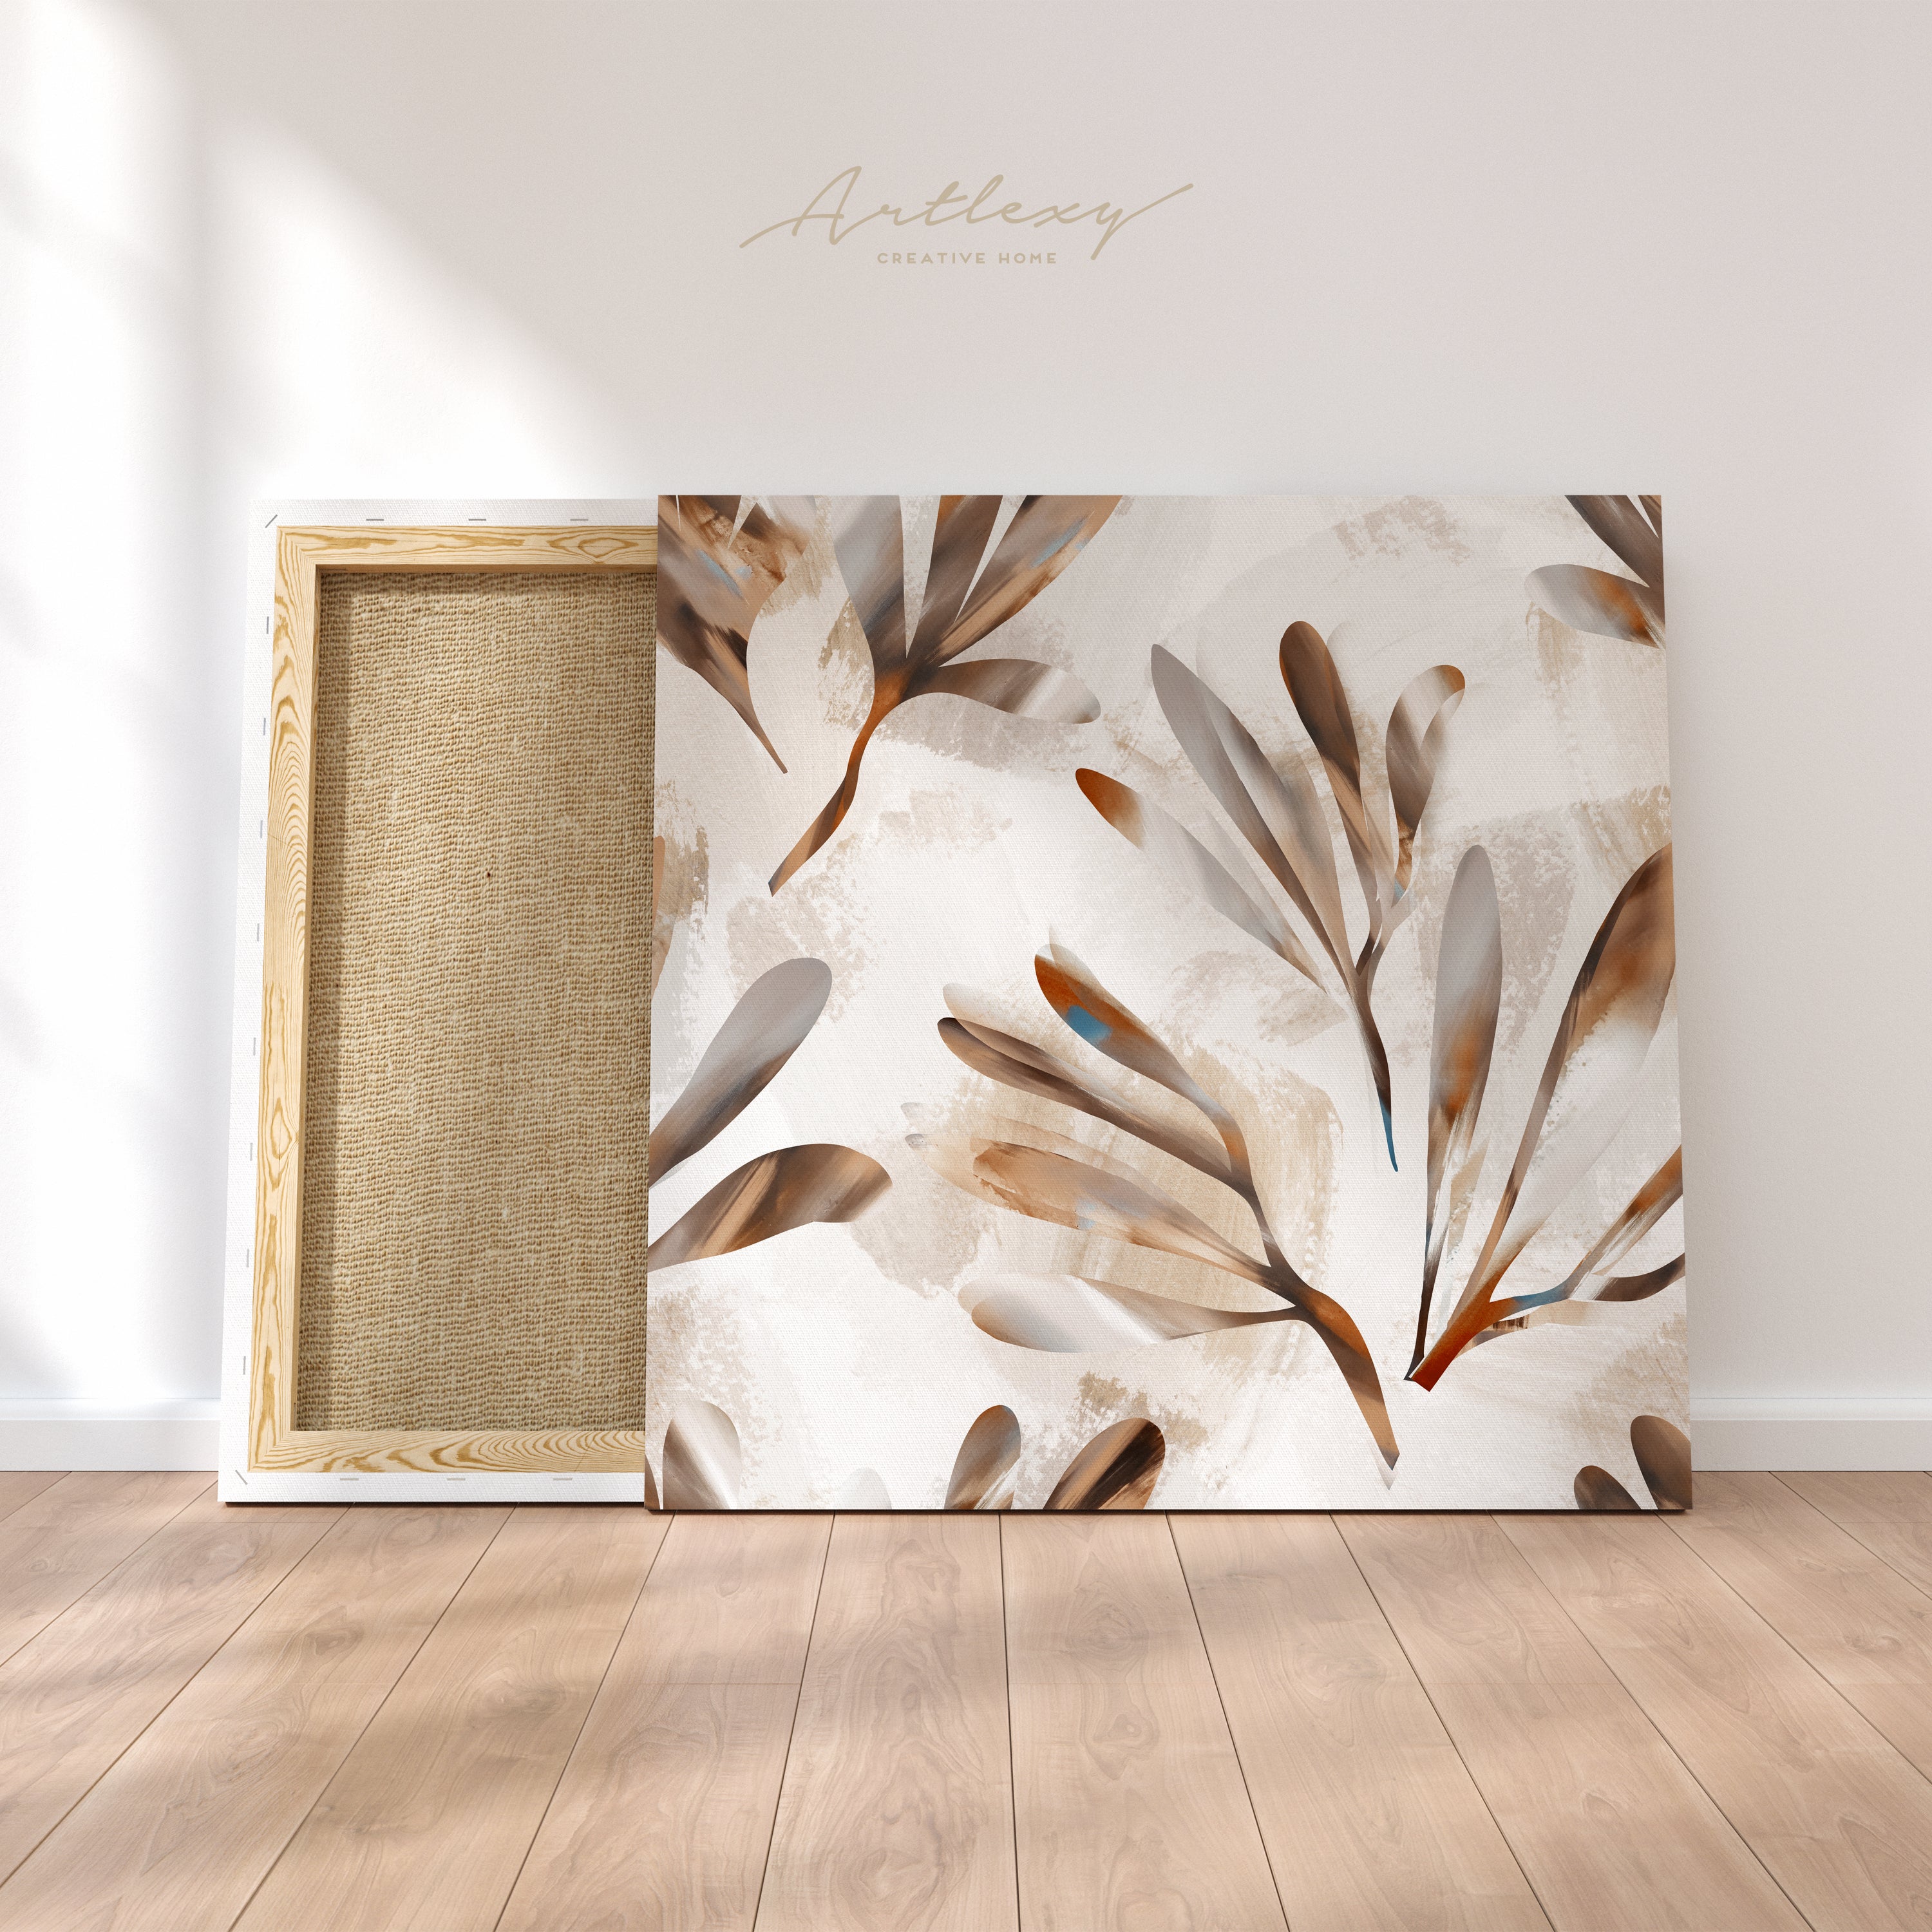 Abstract Beige Leaves Canvas Print ArtLexy 1 Panel 12"x12" inches 